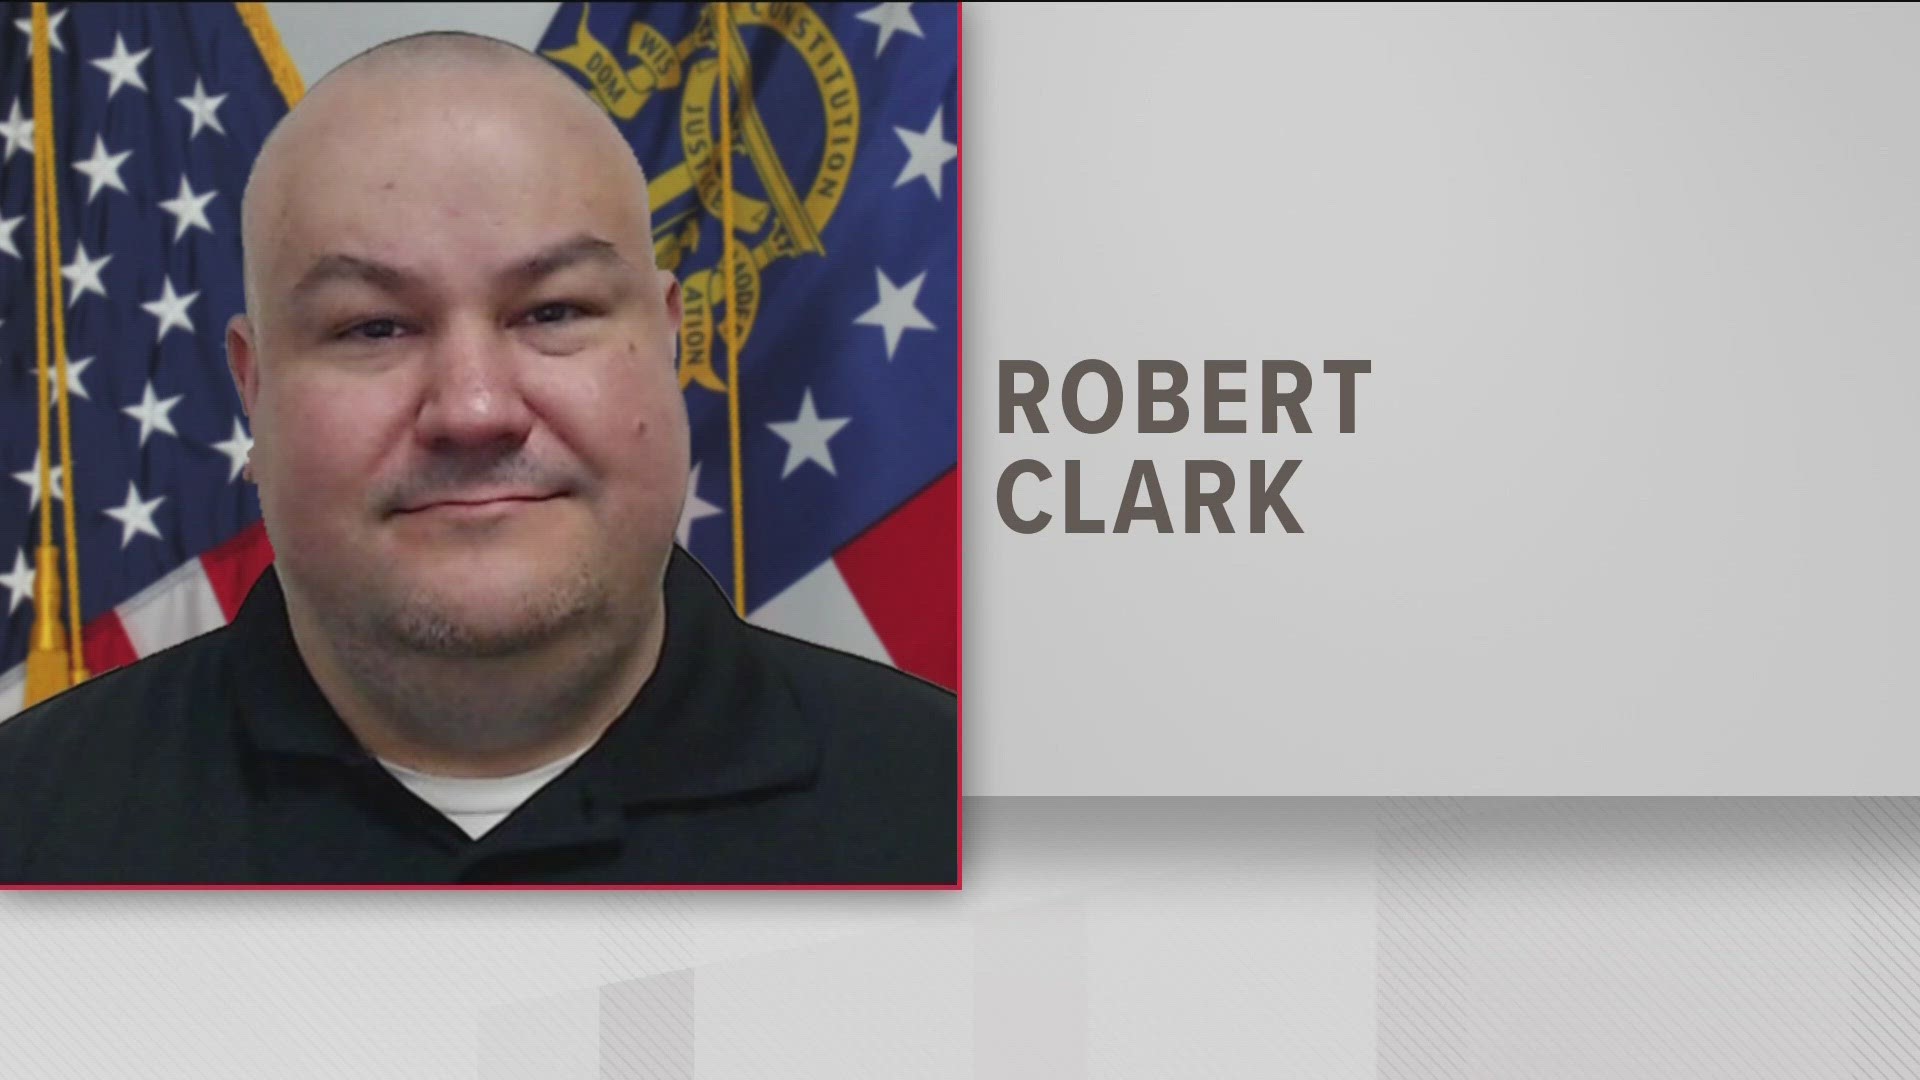 Correctional Officer Robert Clark was killed in what the Department of Corrections described as an assault from behind with a homemade weapon.